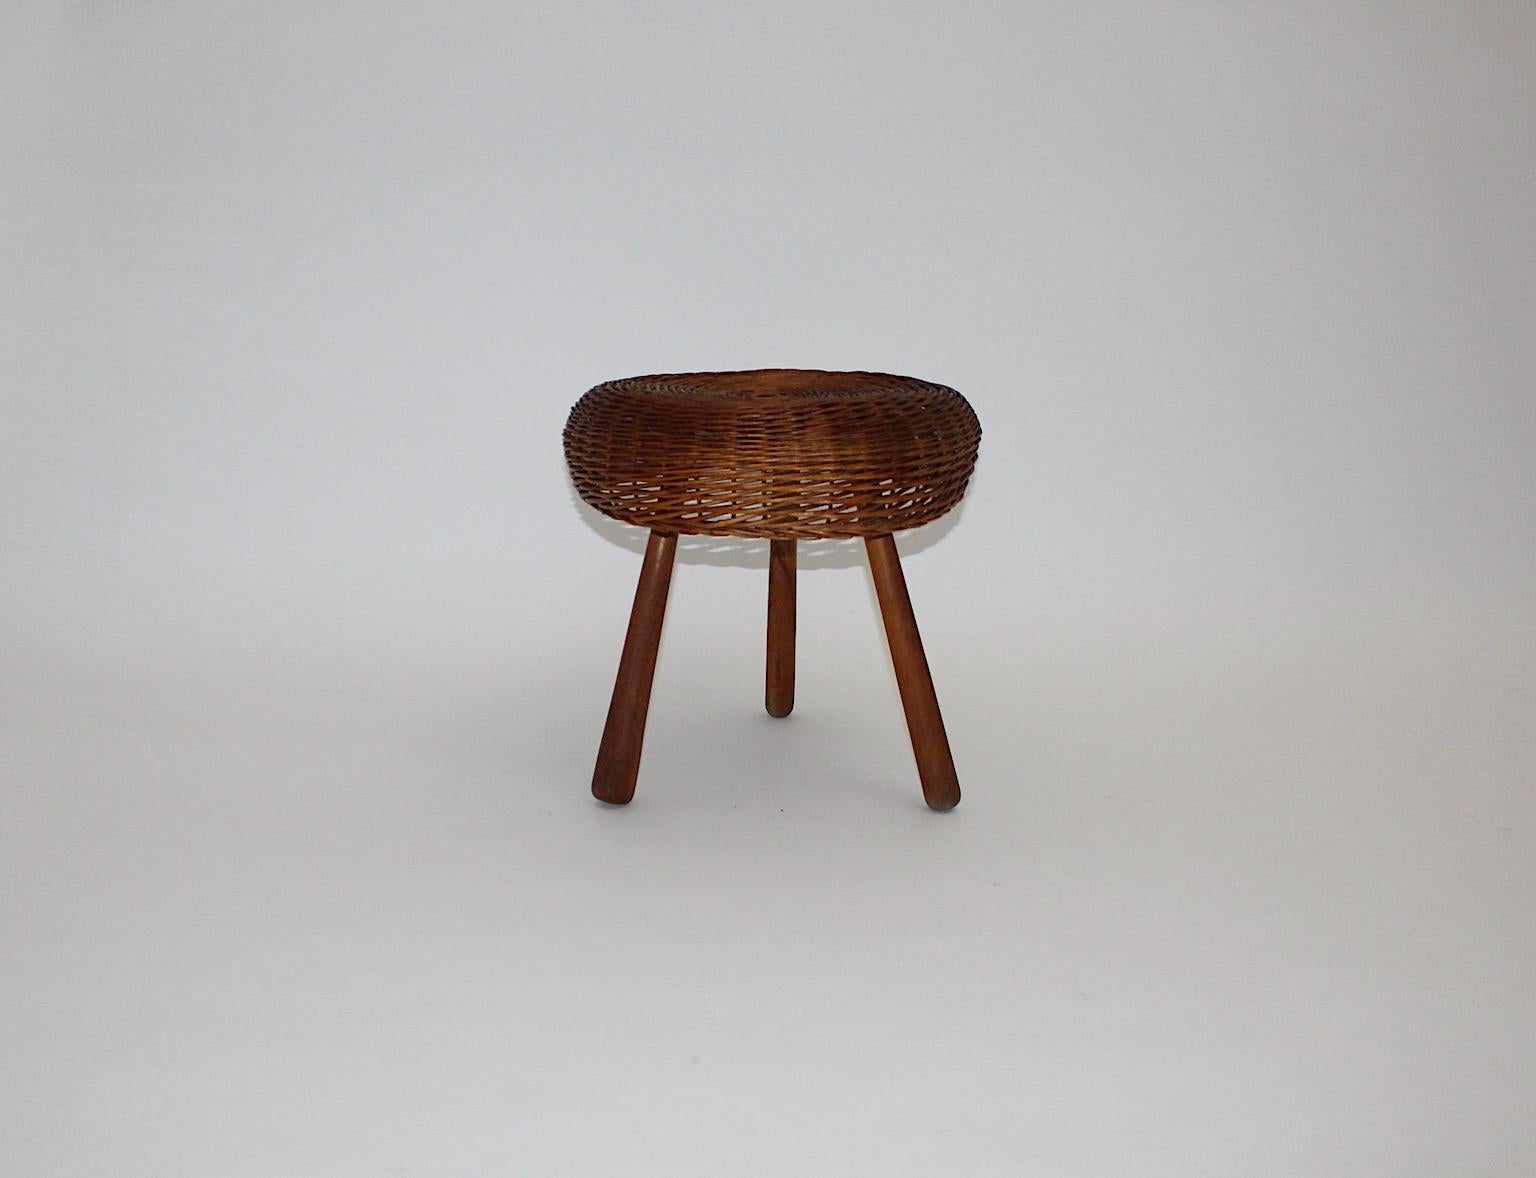 Mid-Century Modern vintage organic stool from rattan and walnut attributed Tony Paul, 1950s United States.
Stunning stool shows a network from rattan for the seat and conical shaped walnut feet.
Walnut wood features warmth and depth.
The stool is